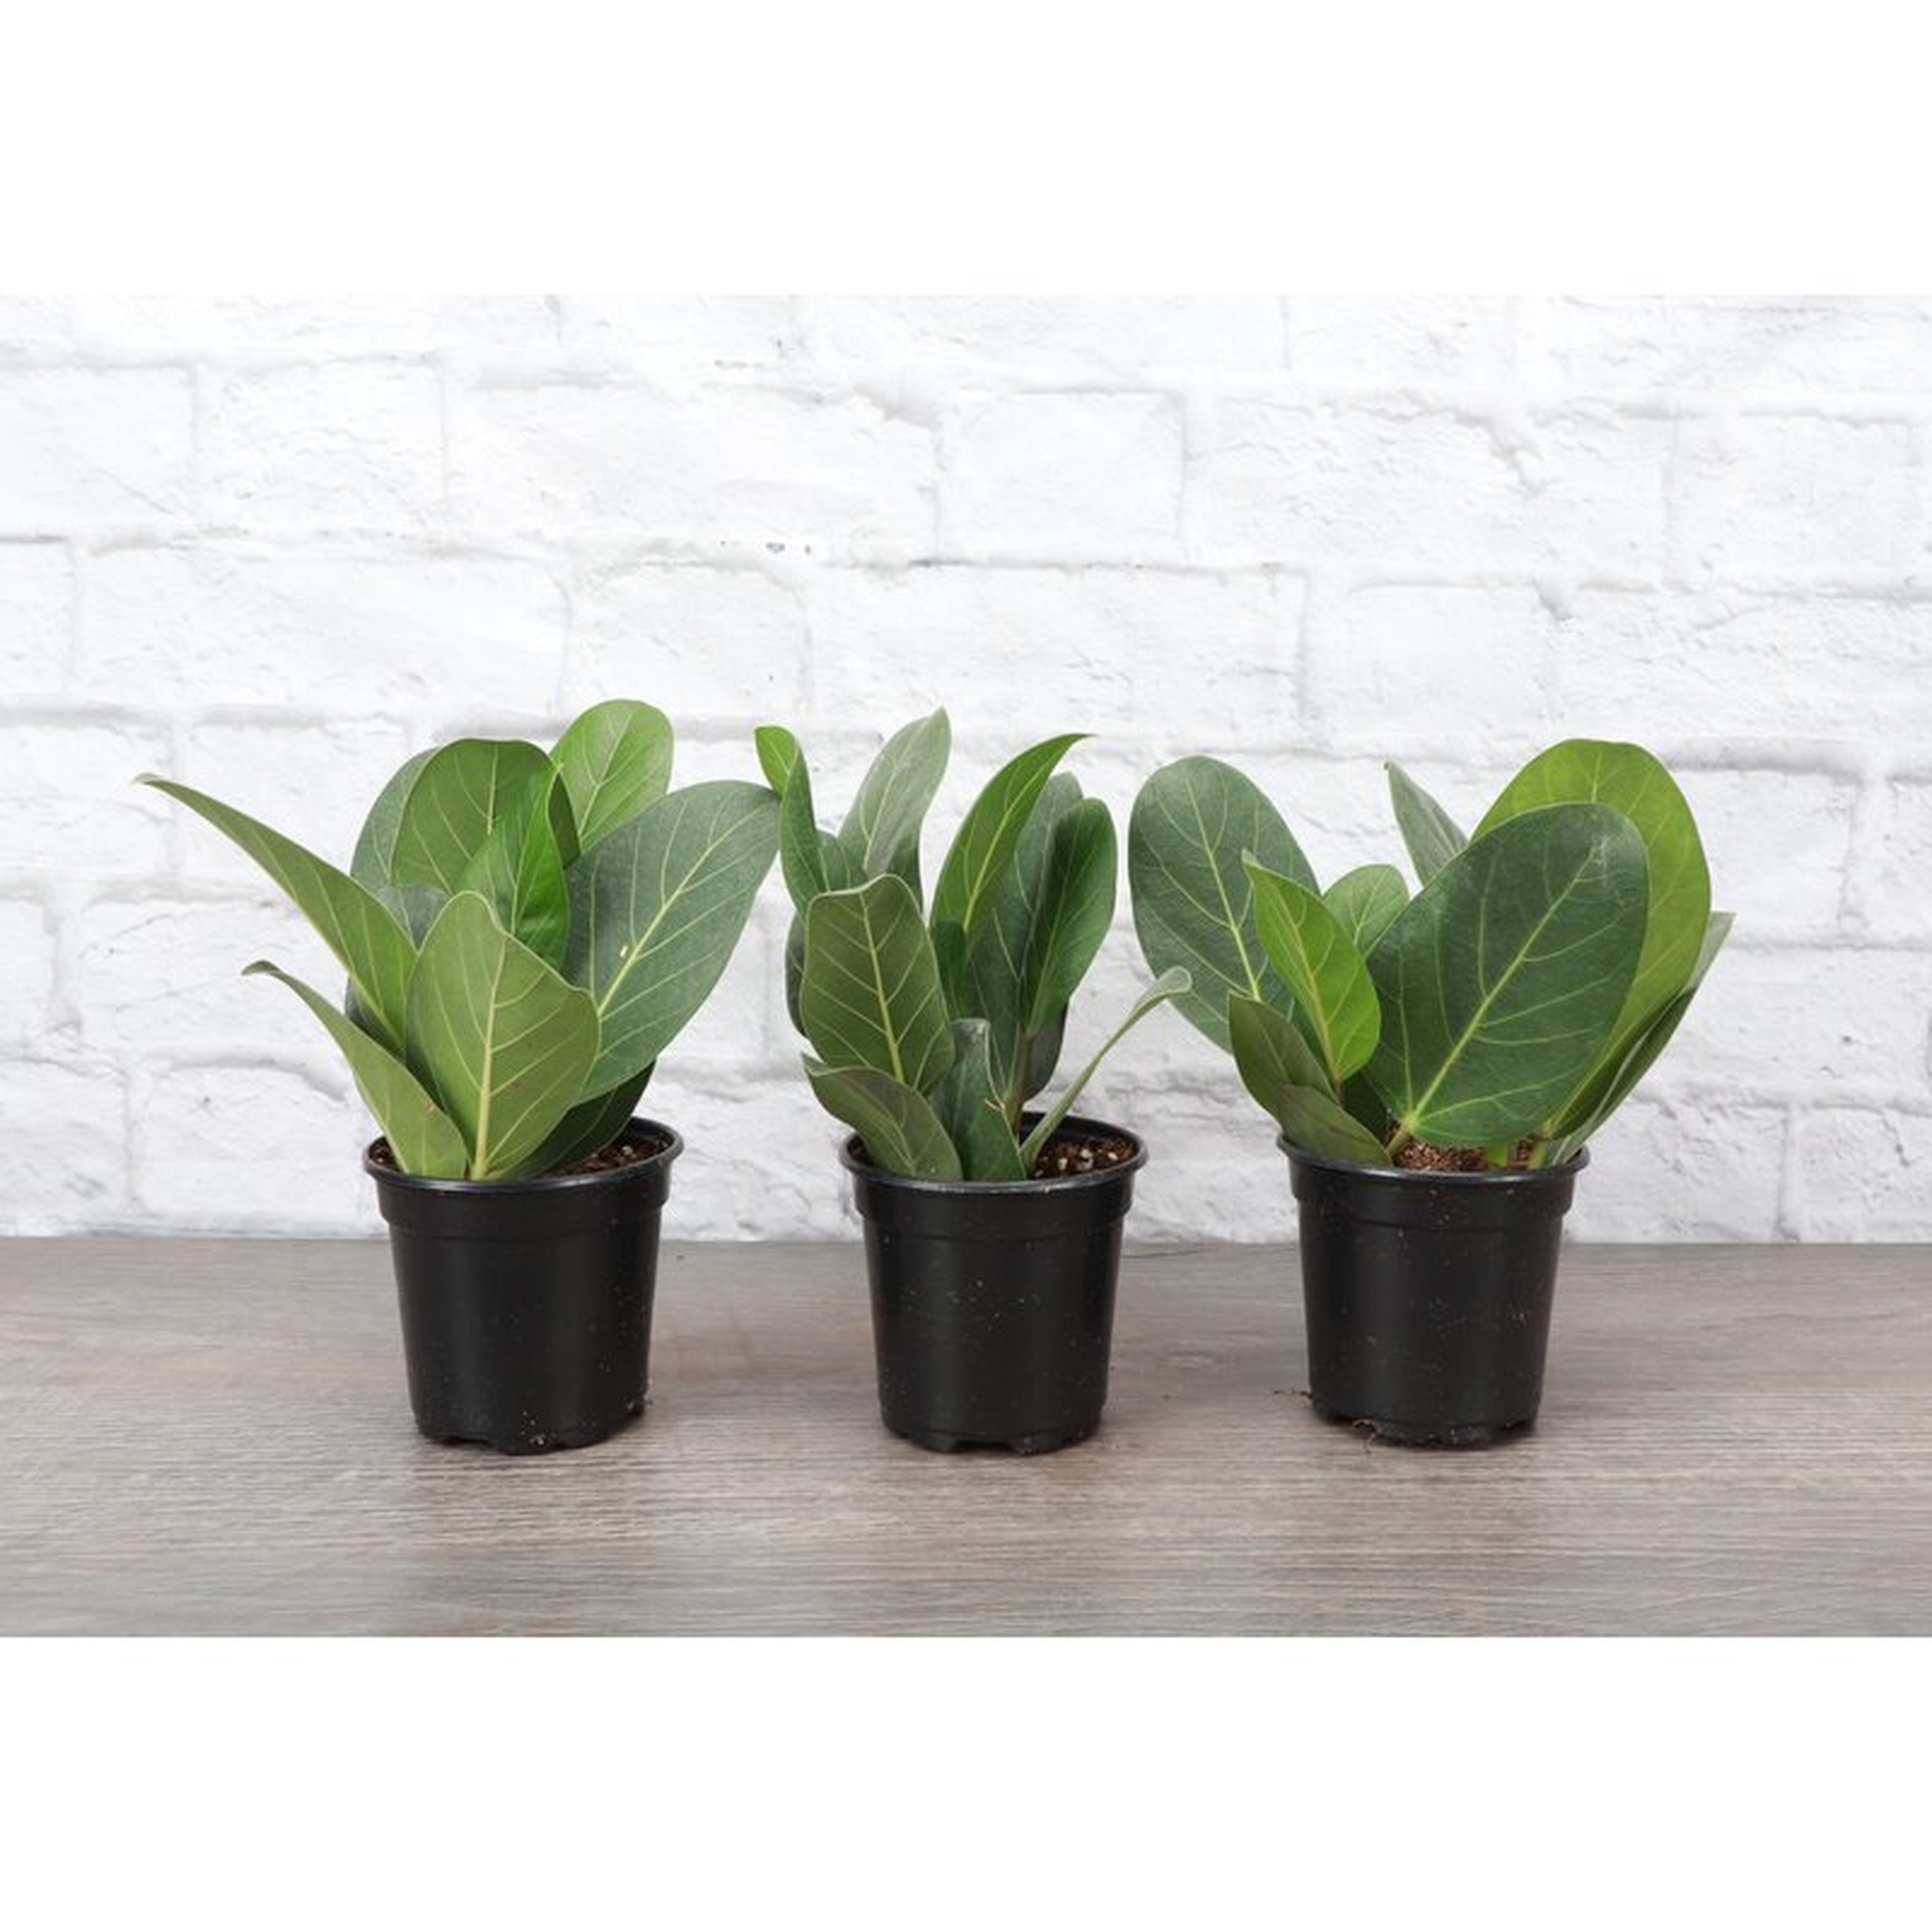 Live Ficus Benghalensis in Planter, Set of 3 - Perigold